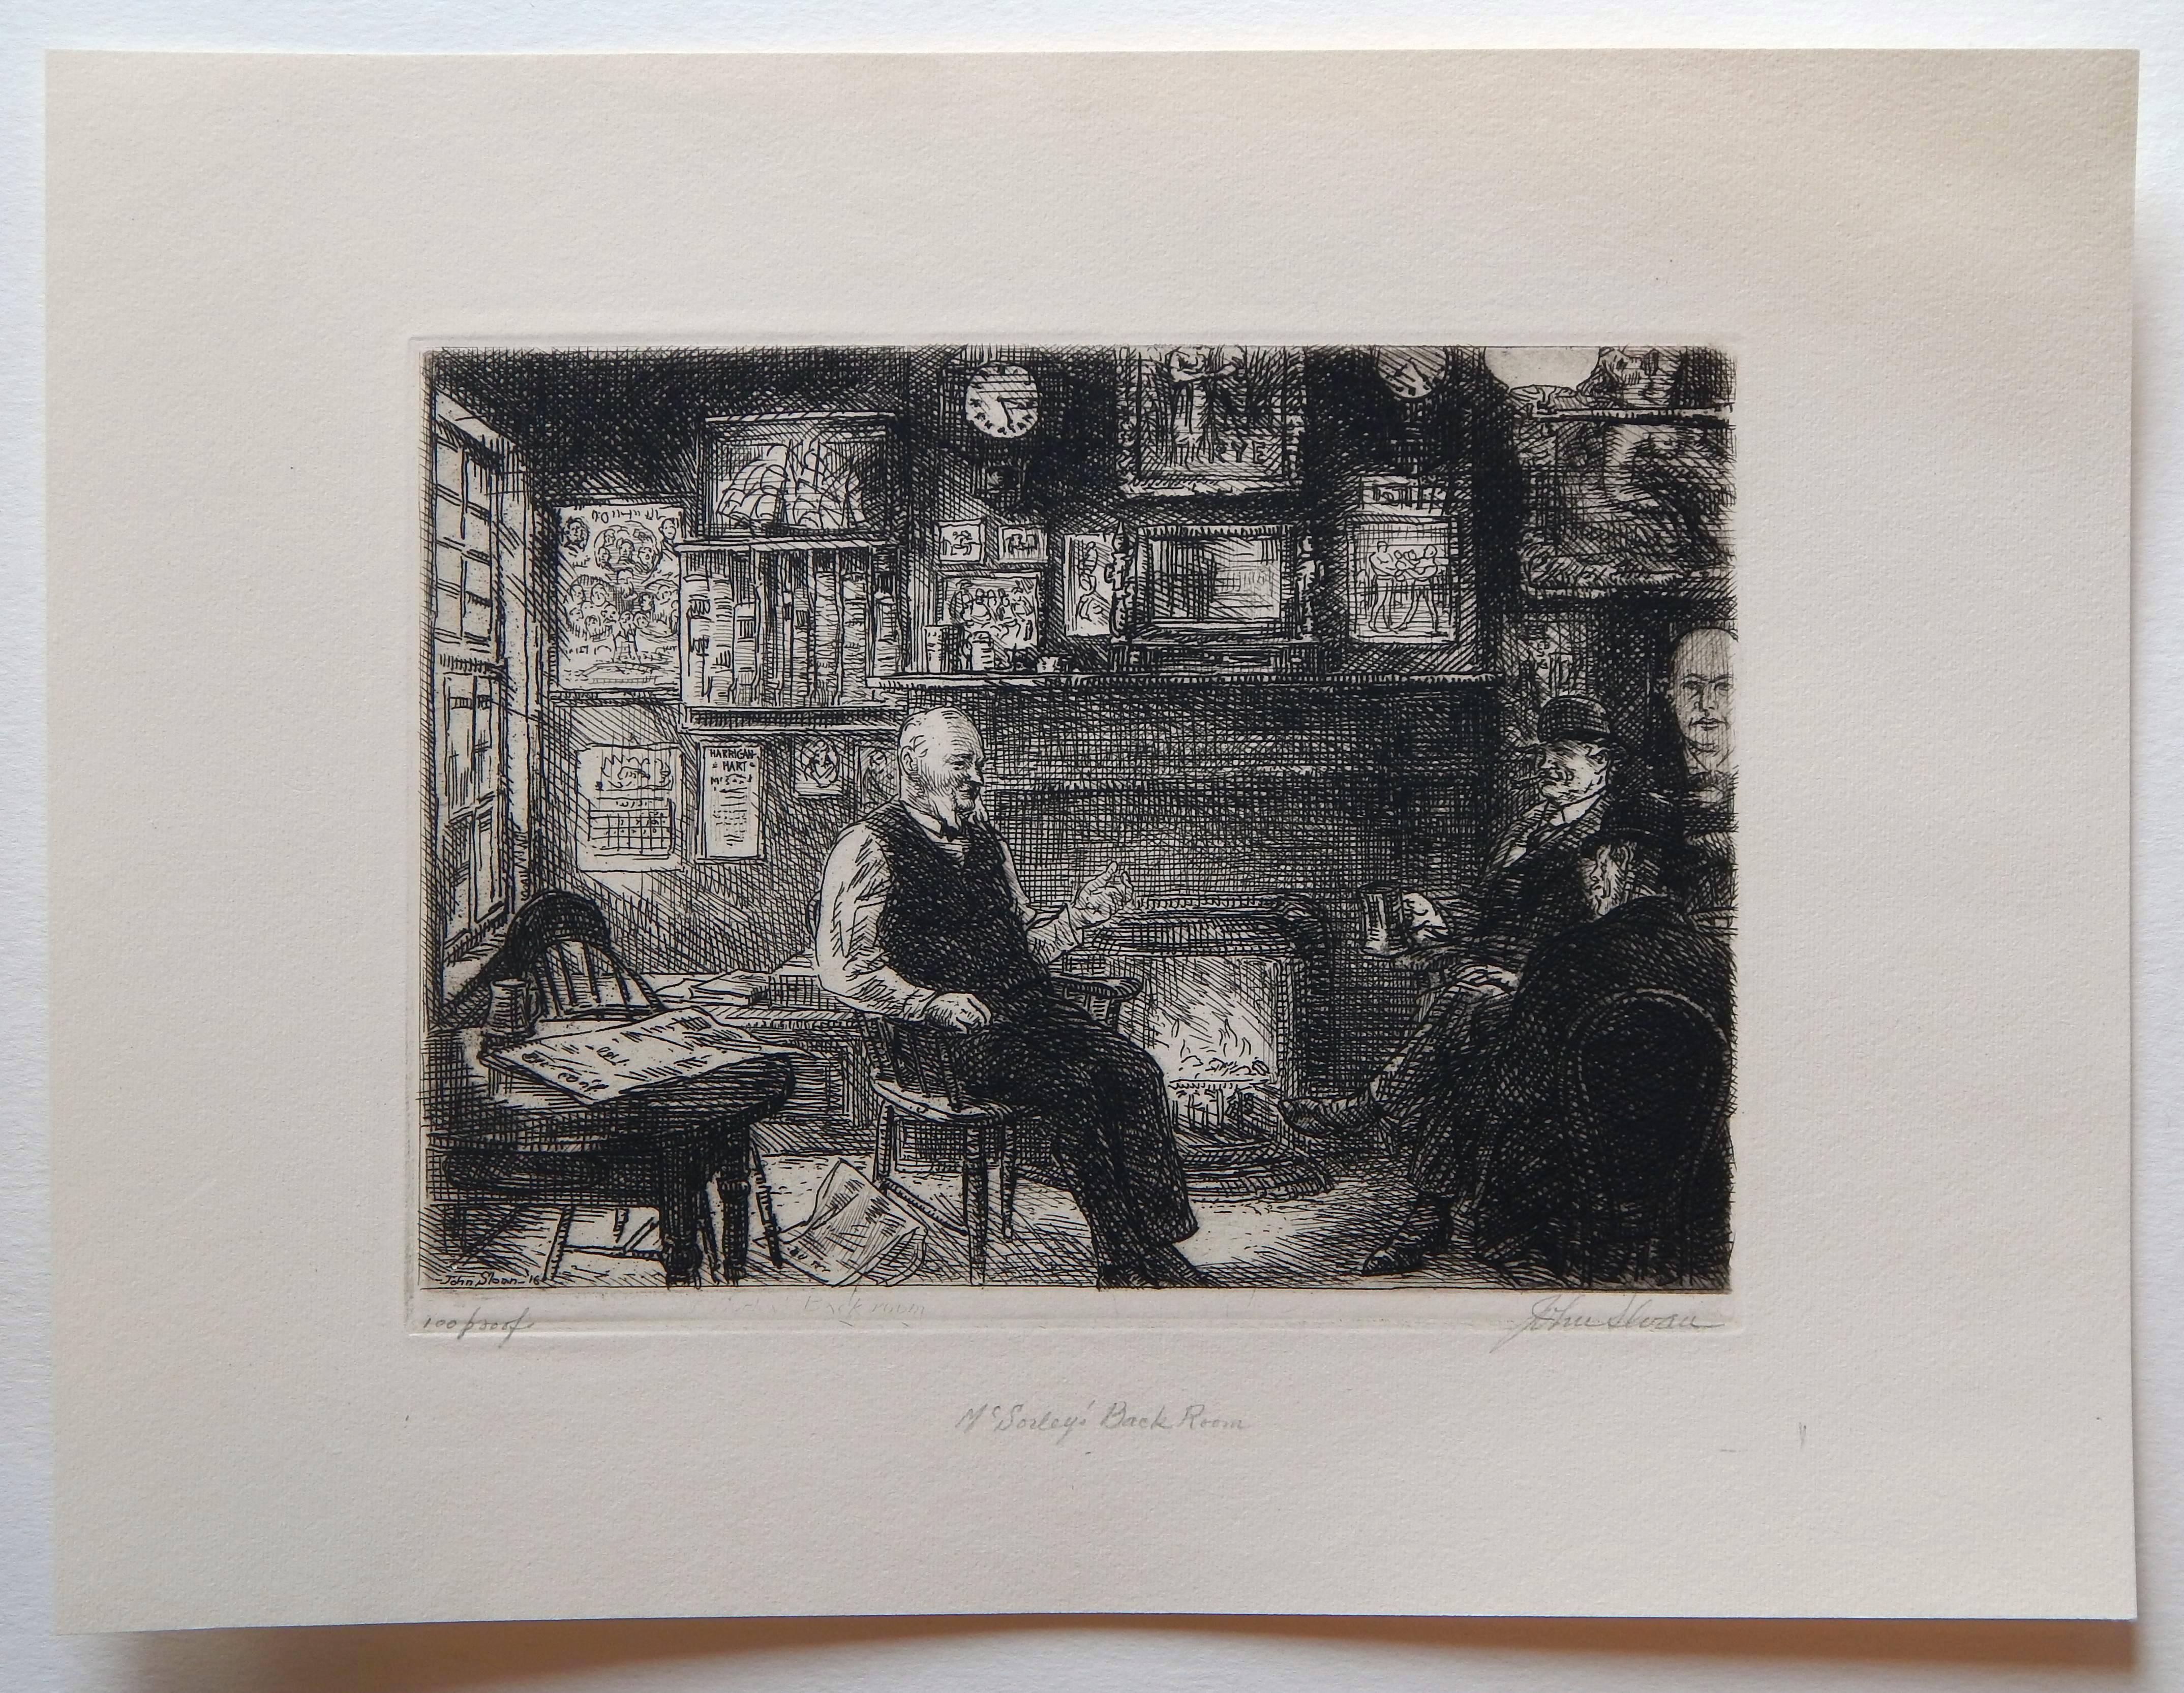 John Sloan (1871-1951) etching created 1916.
Edition: 100
Titled: “McSorley’s Back Room”
Plate size: 5 1/4